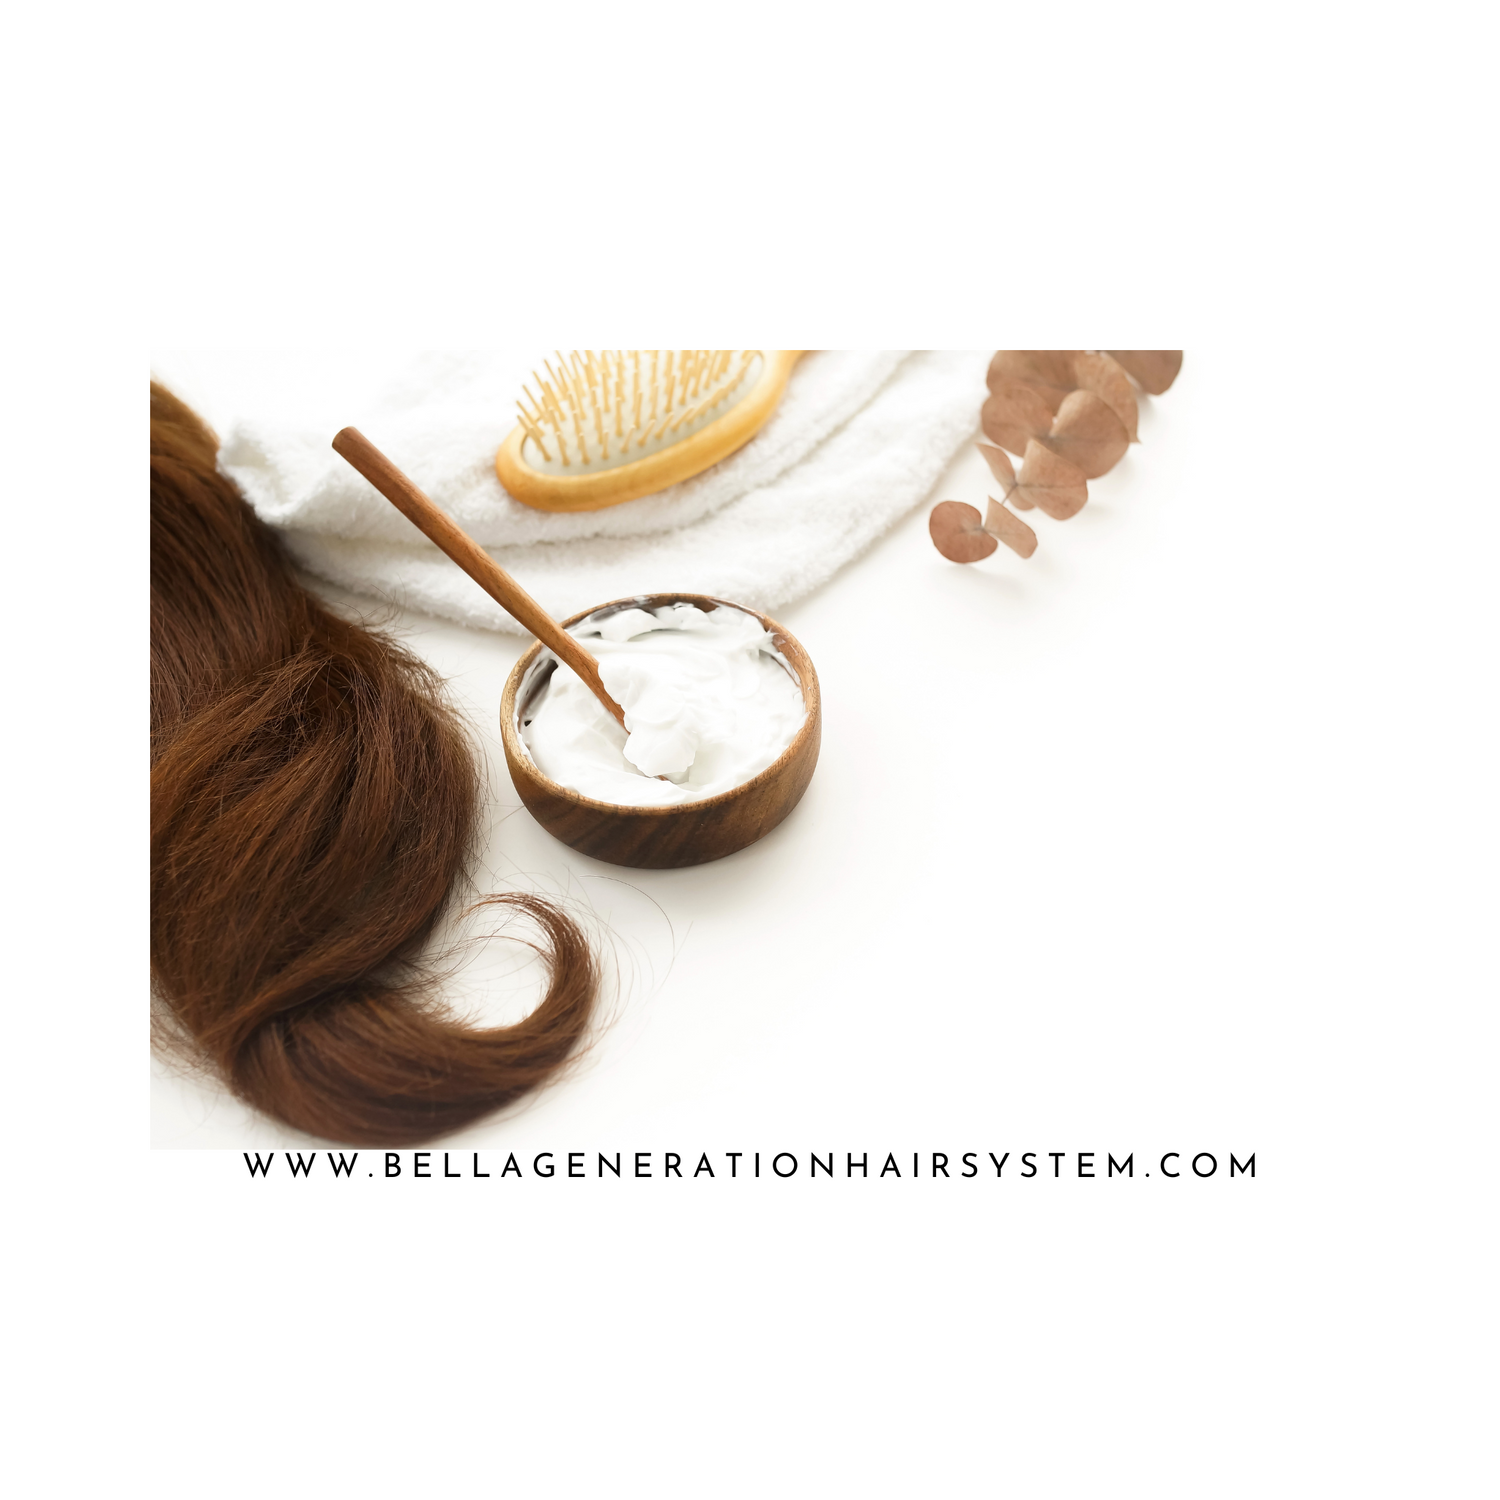 Coconut oil is a centuries old remedy for dry, damaged, or frizzy hair.